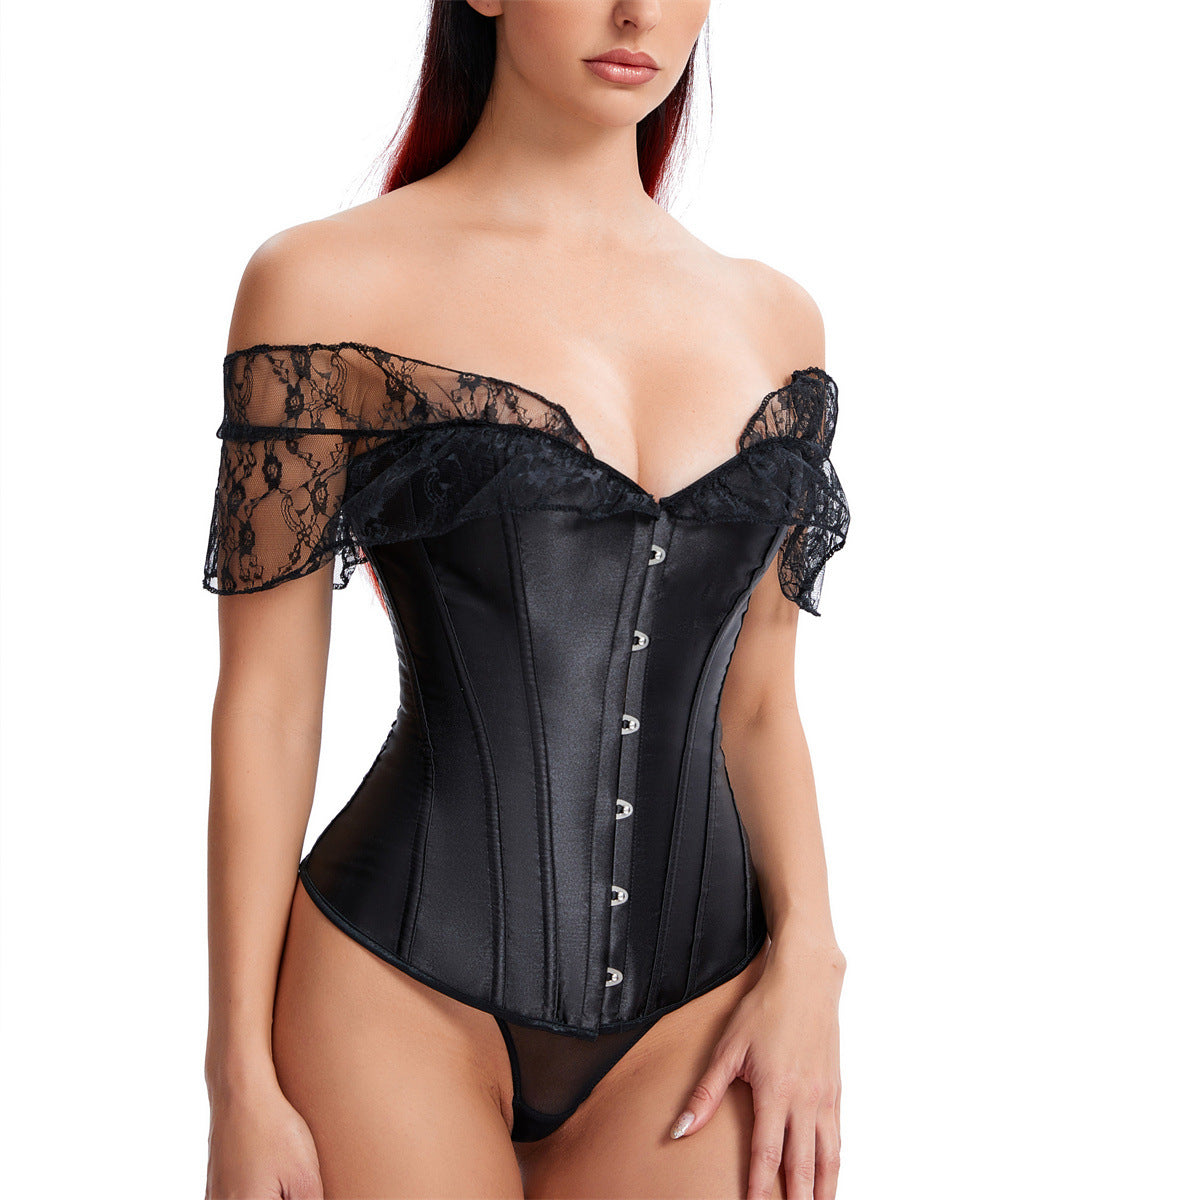 Lace Short Sleeved Corset